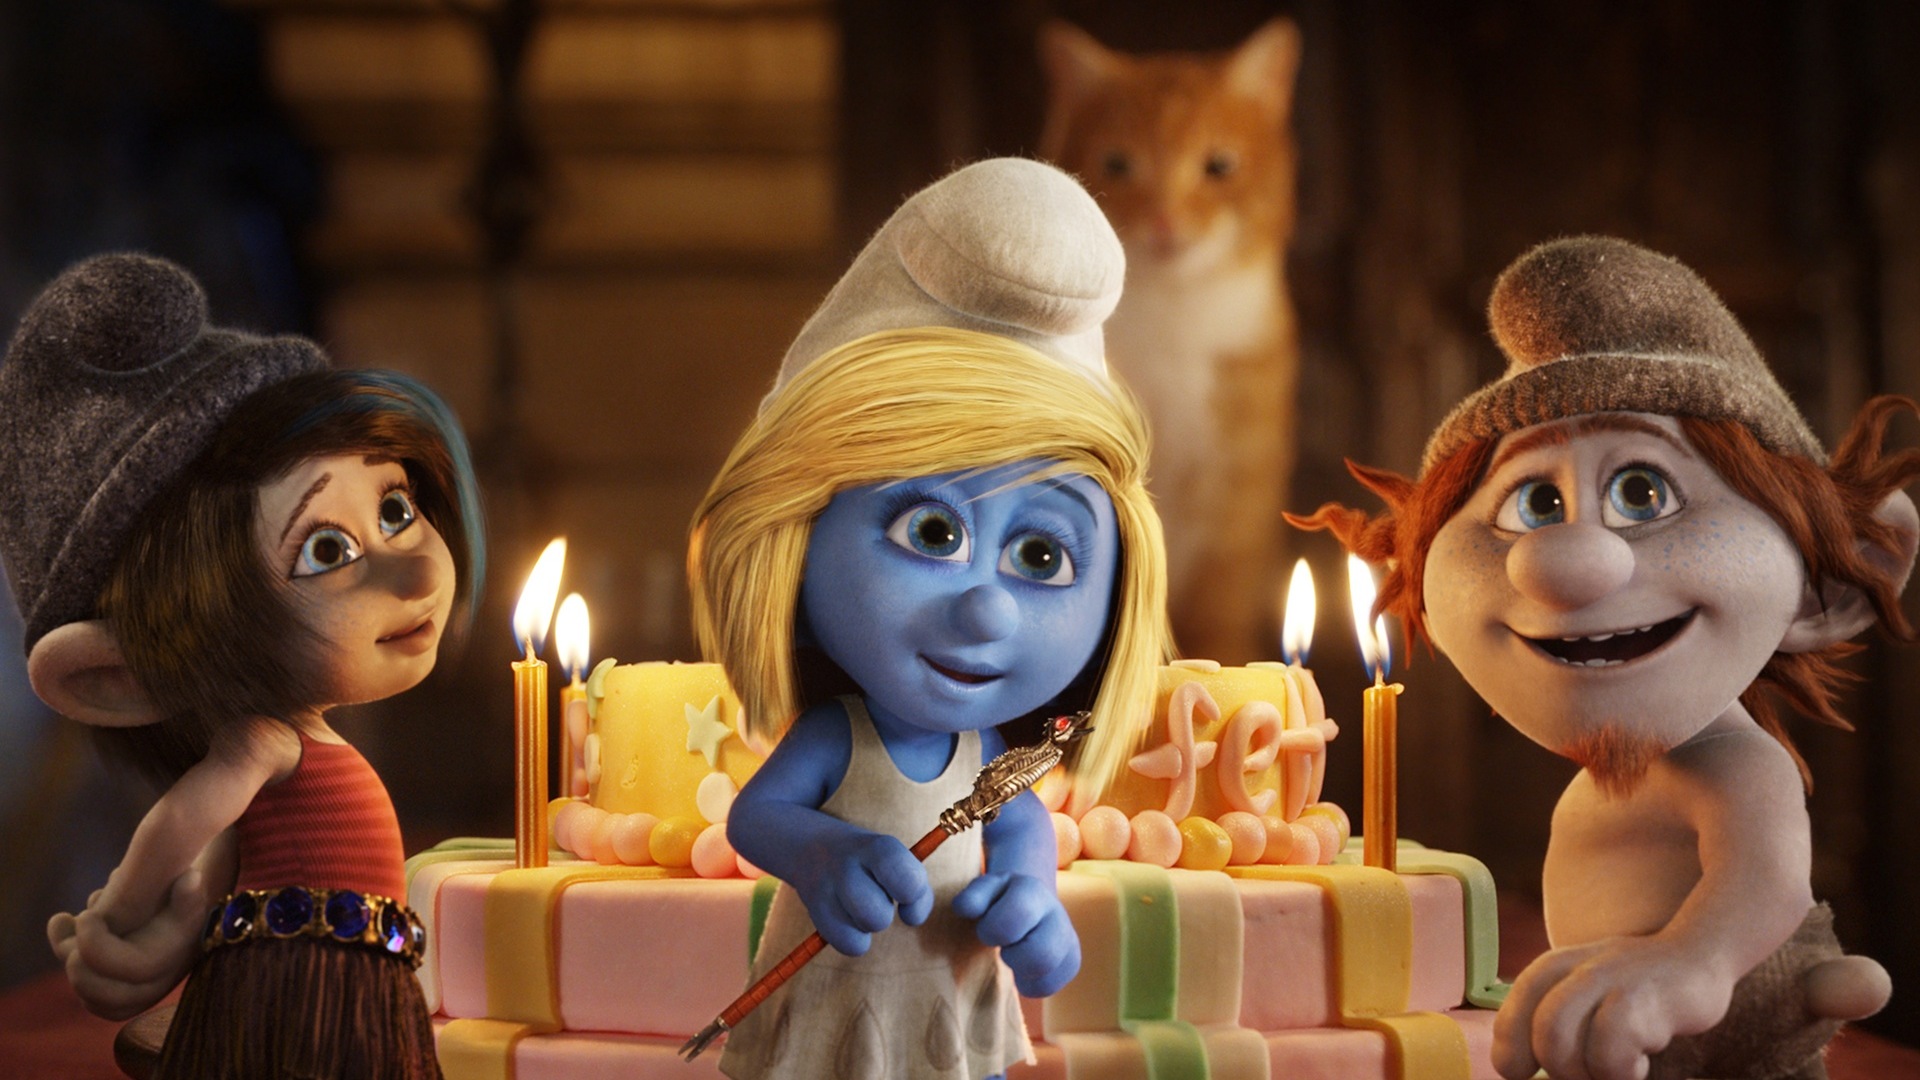 The Smurfs 2 HD movie wallpapers #2 - 1920x1080